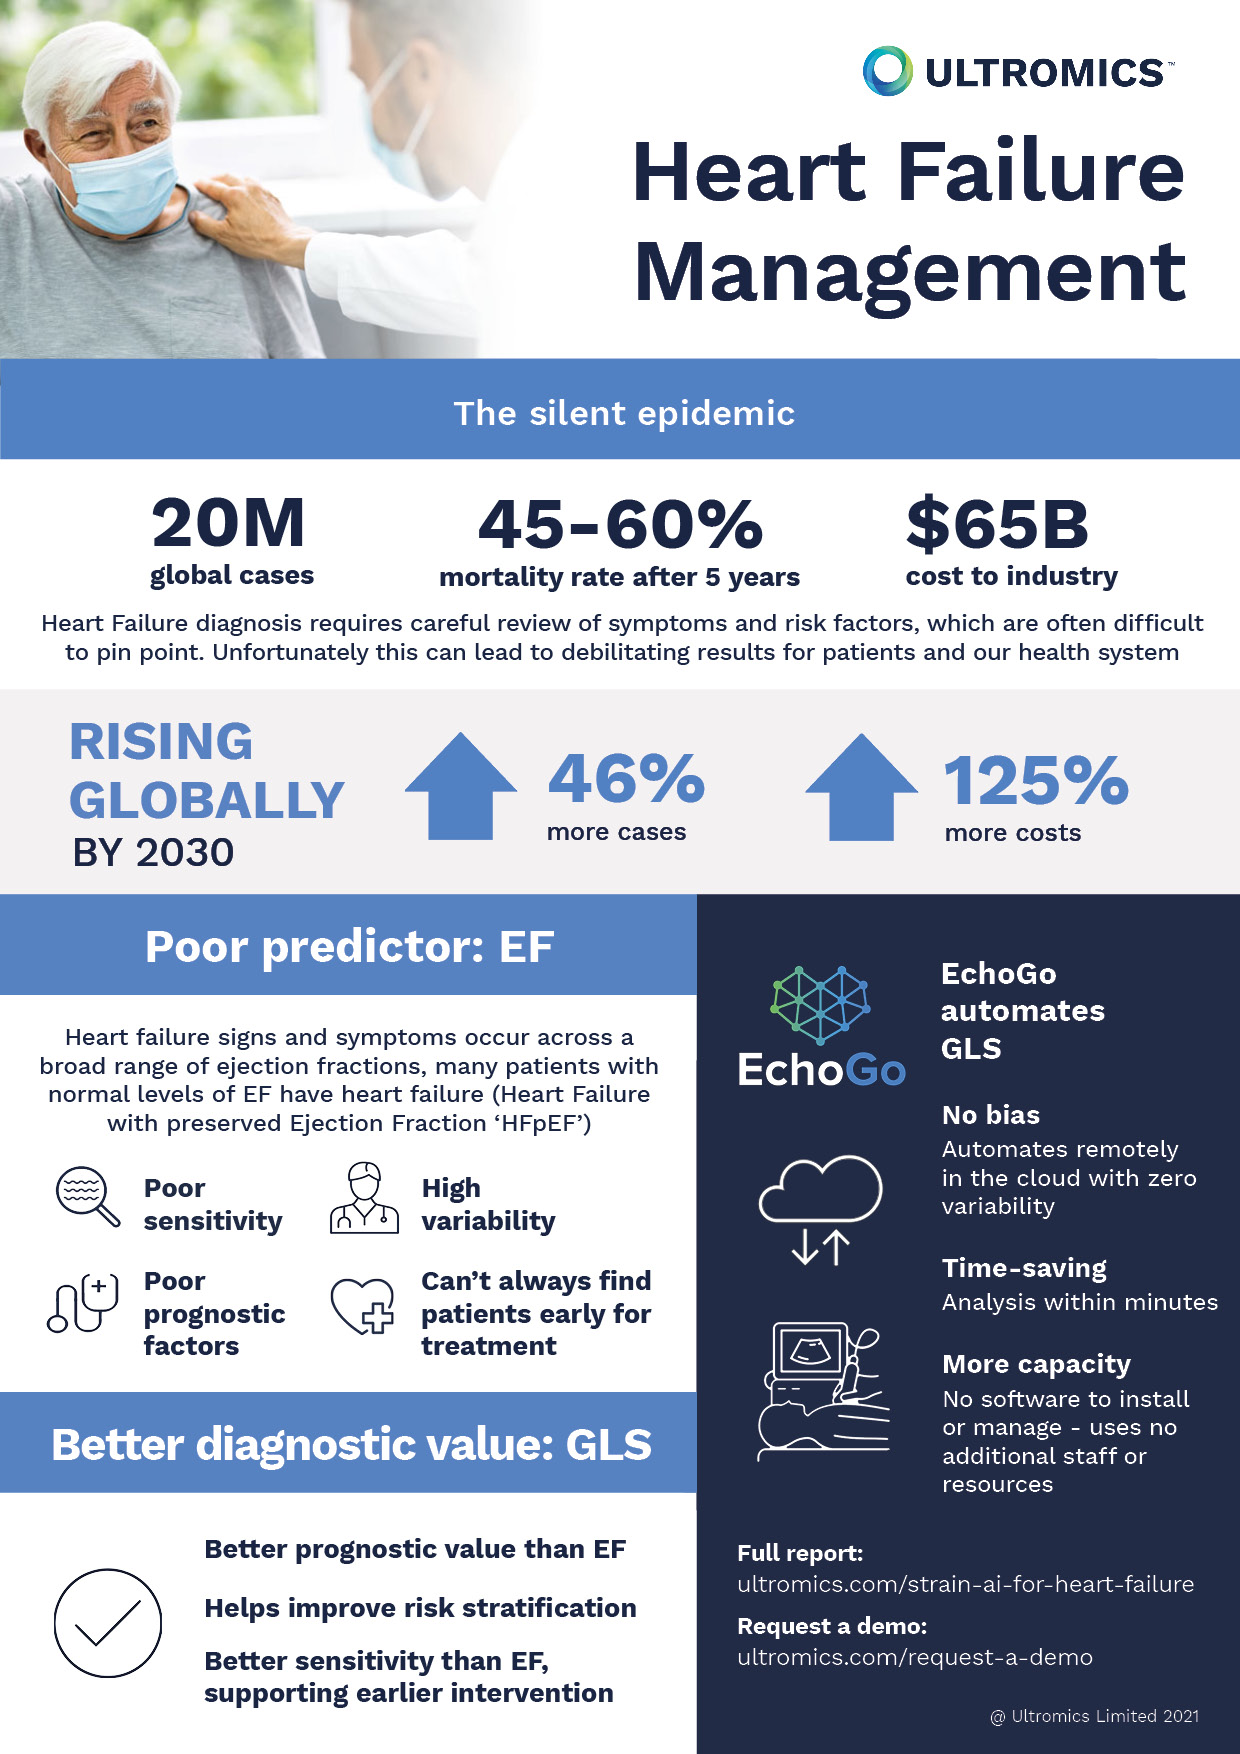 An infographic with key statistics on Heart Failure management.